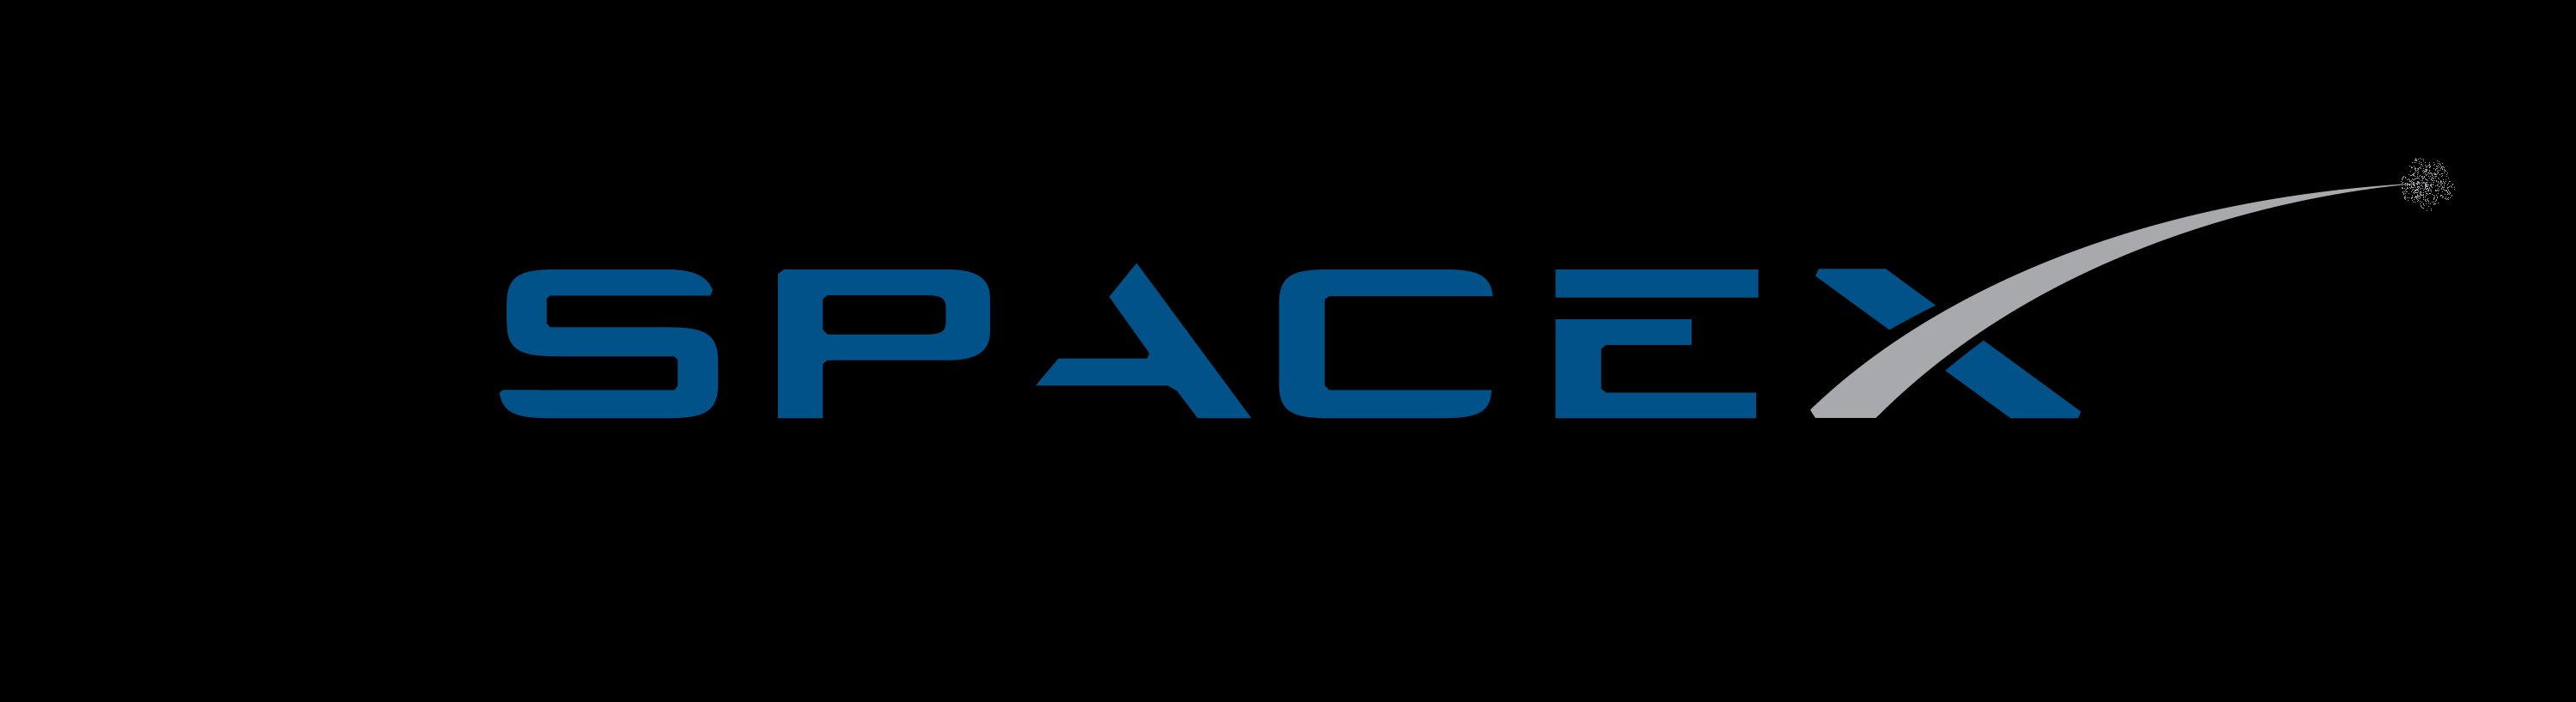 SpaceX X Logo - SpaceX Logo corrected